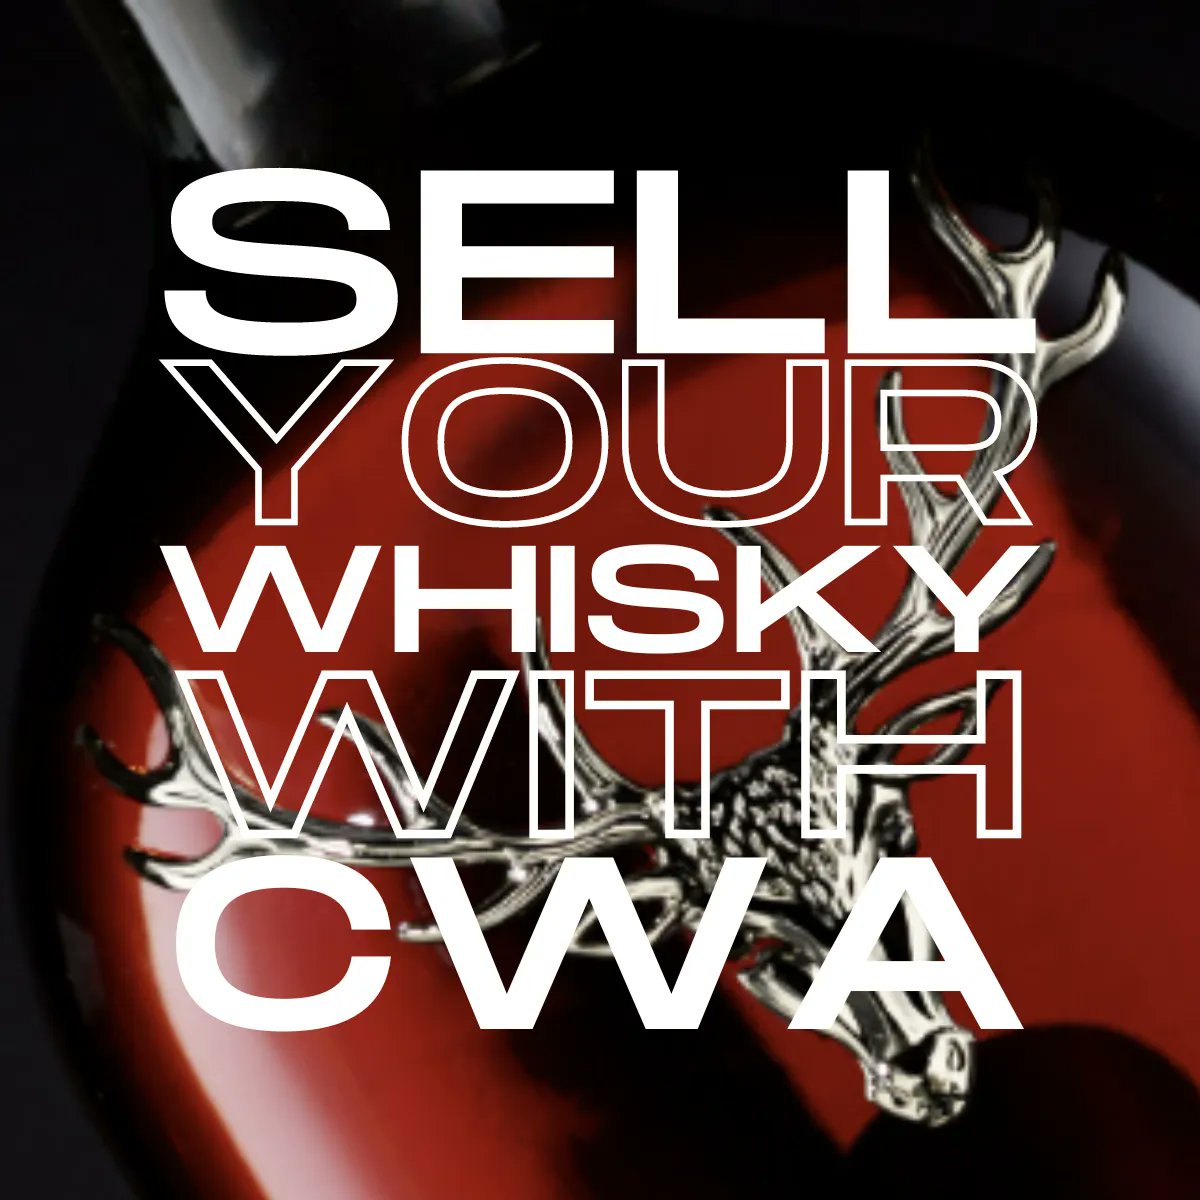 Sell your whisky with Click Whisky Auctions. If you bottle doesn't sell, we won't charge you a penny! #sellwhisky #whisky #value #simple #whiskyauction #whiskyauctions #clickwhisky #clickwhiskyauctions